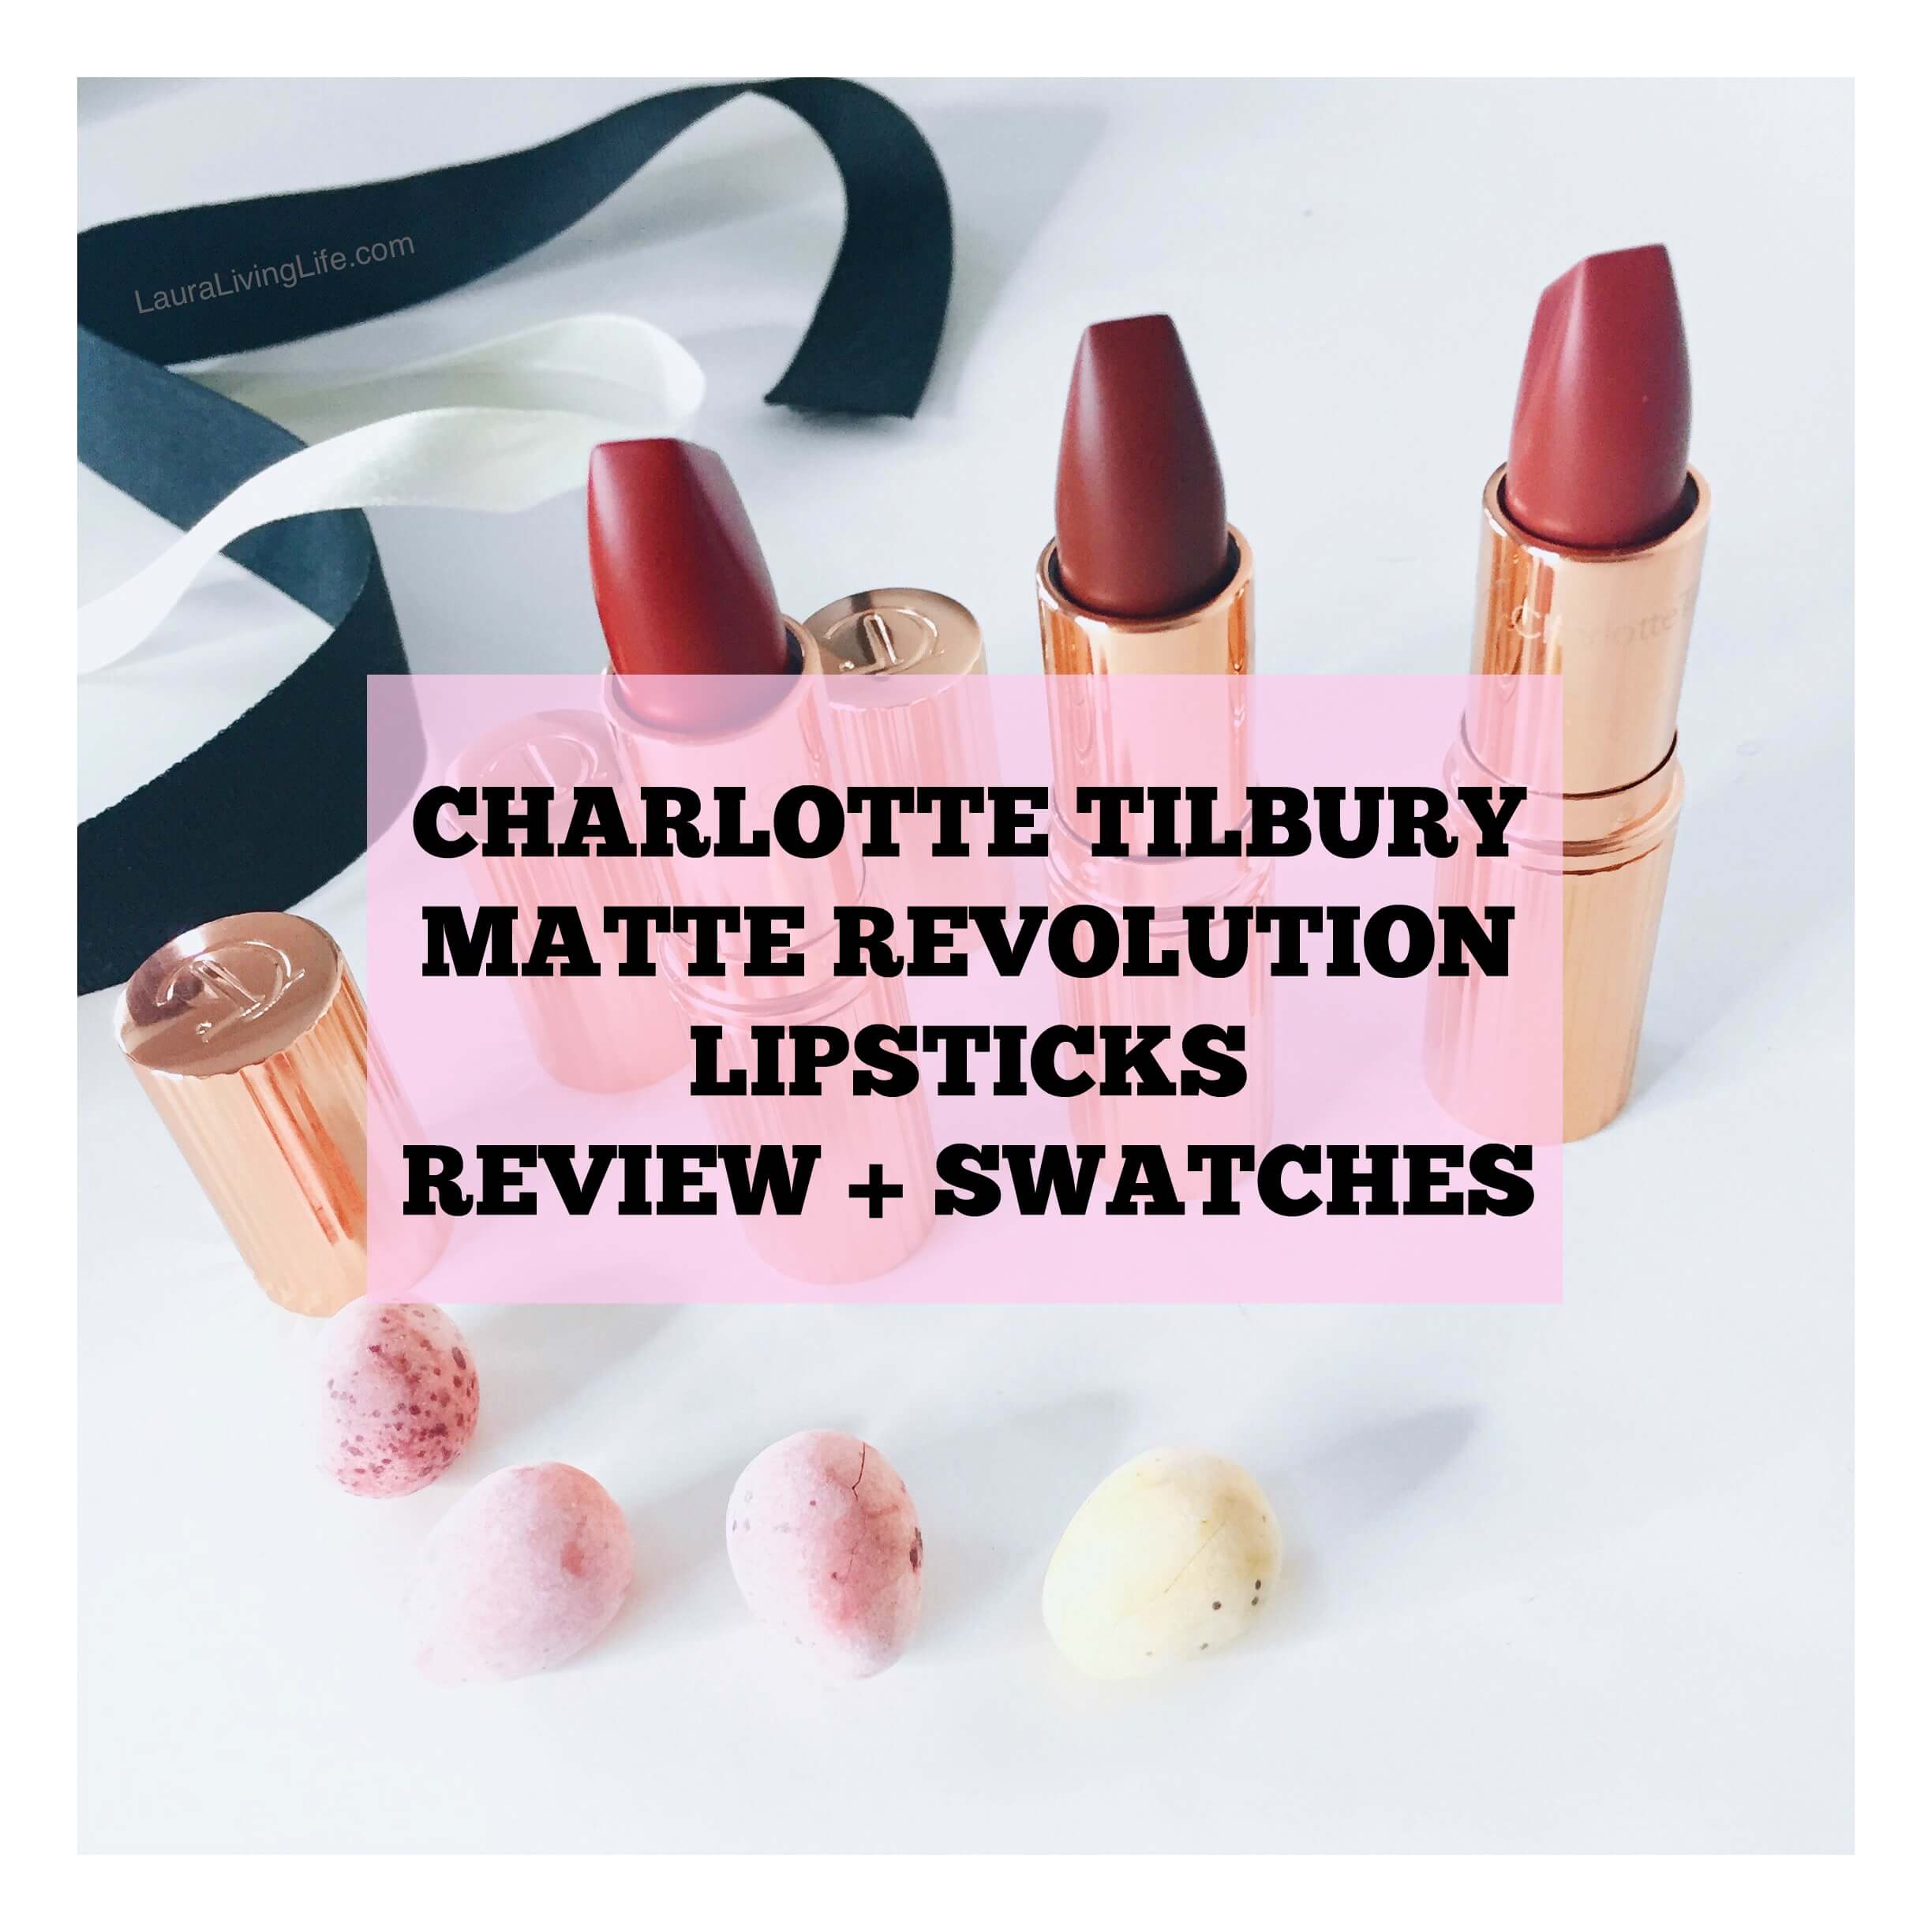 Chalotte tilbury lipsticks review and swatches lauralivinglife.com